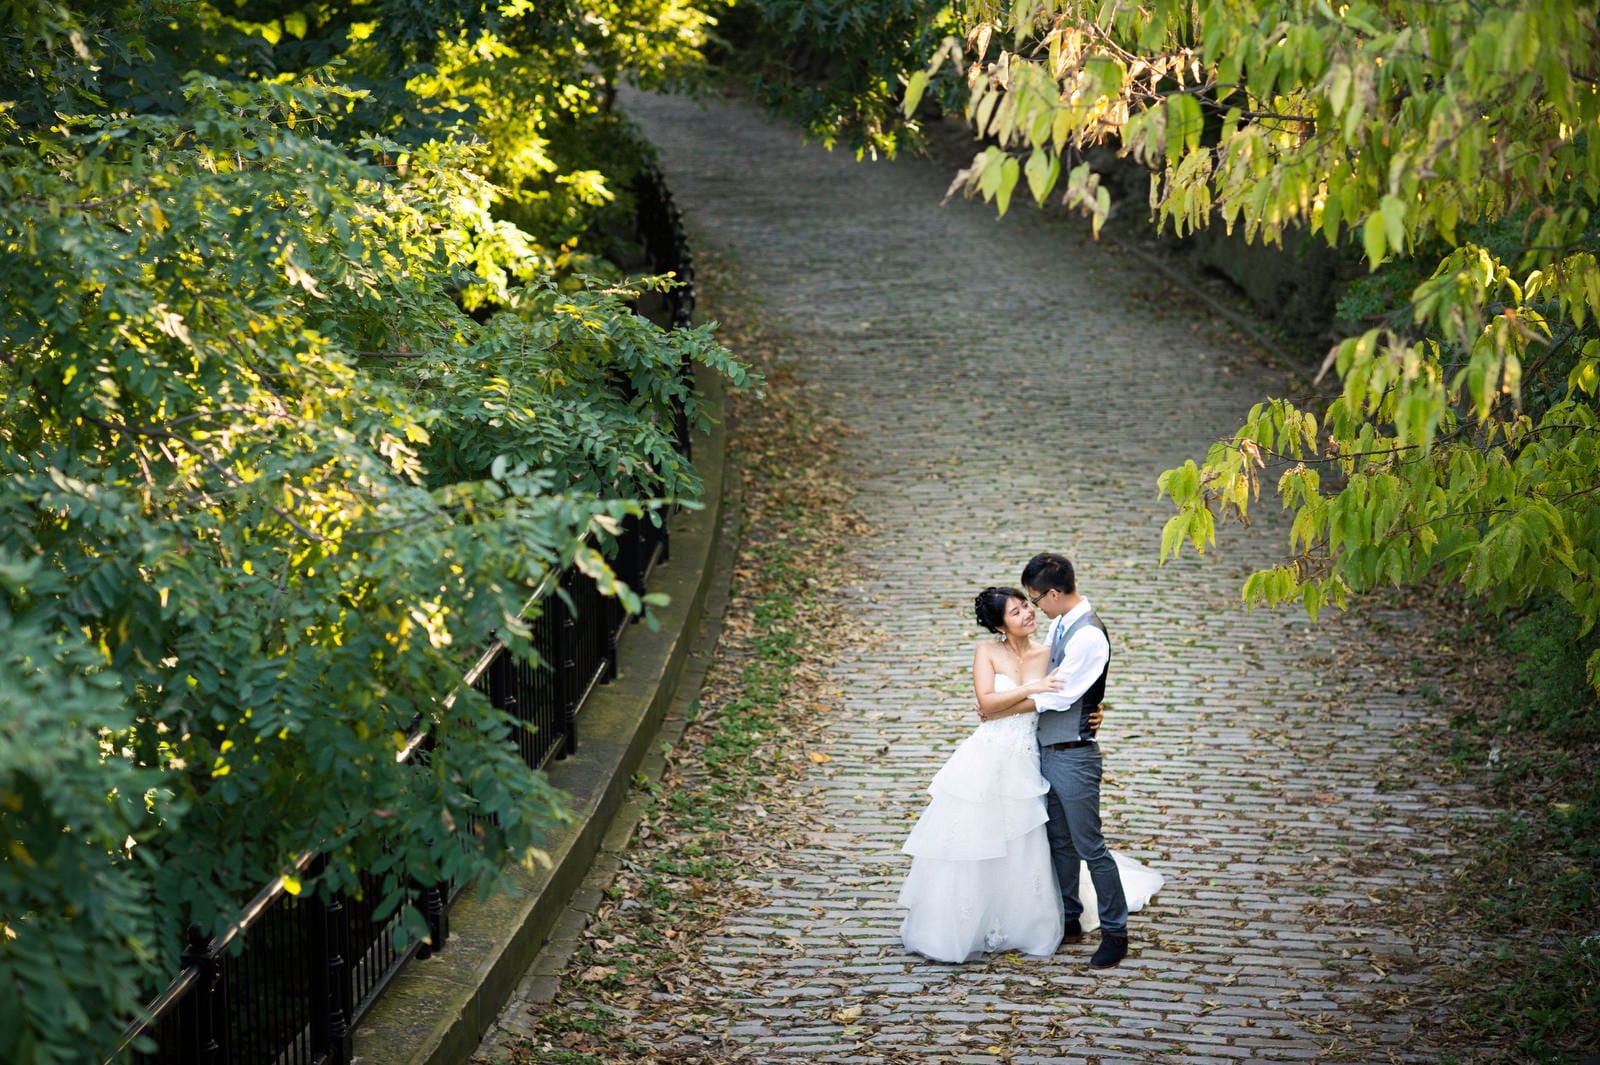 A bride and groom embrace on the paving stone path behind the Schenley Park visitor's center as seen from above.